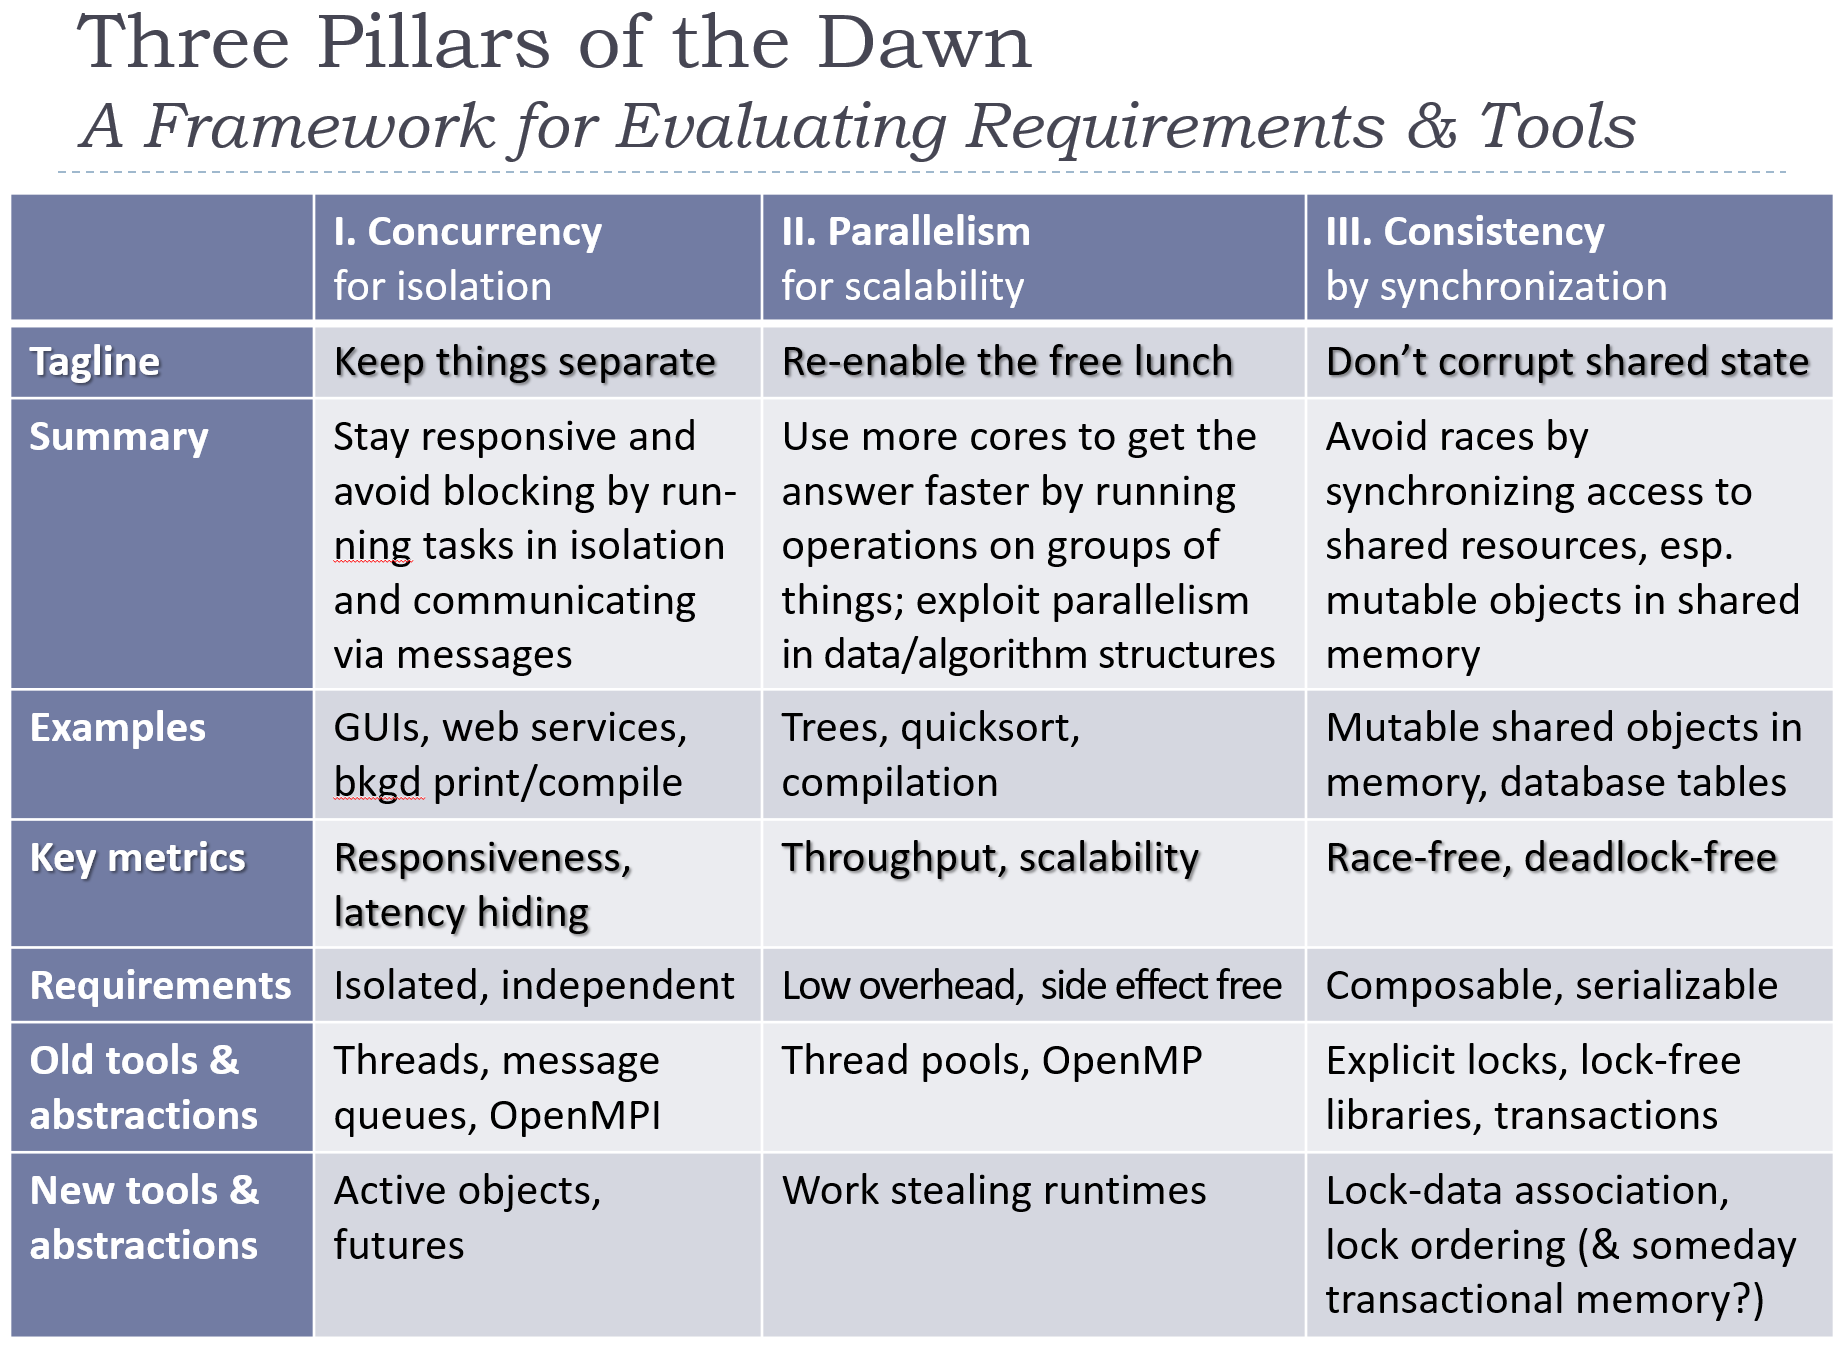 A Taxonomy of Uses for Concurrency